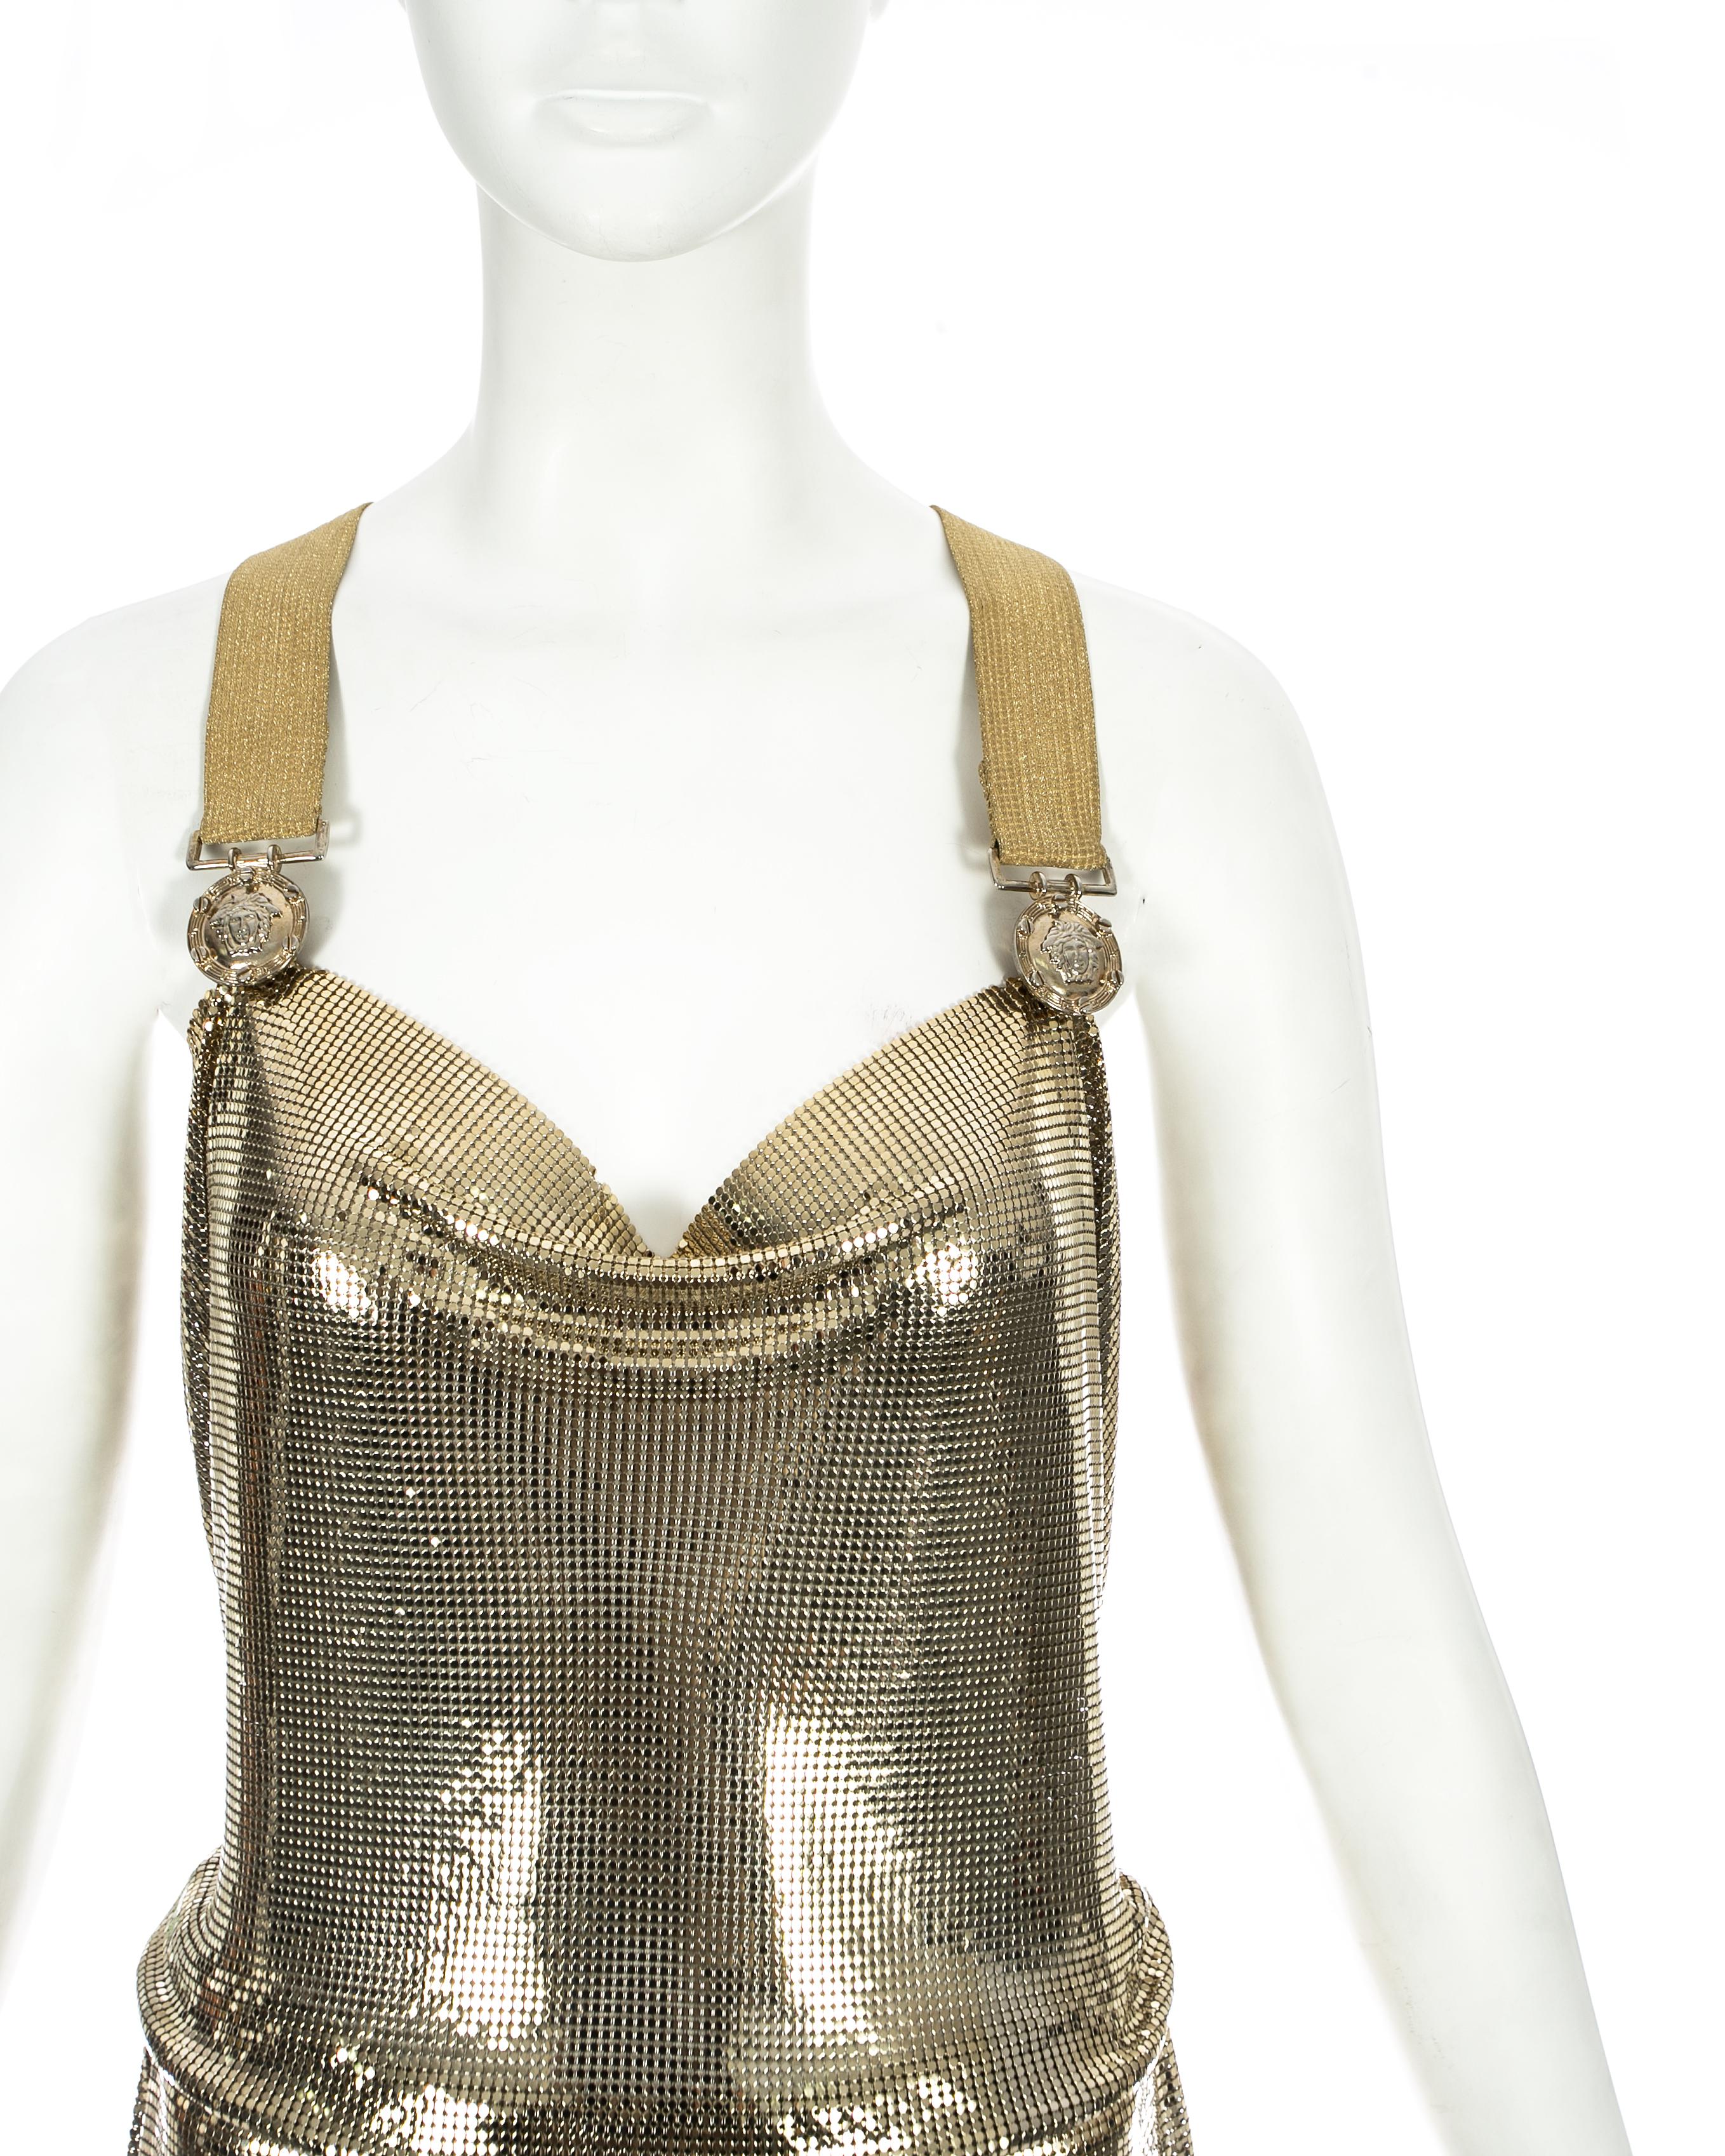 Gray Gianni Versace gold metal mesh chainmail evening dress, fw 1994 For Sale